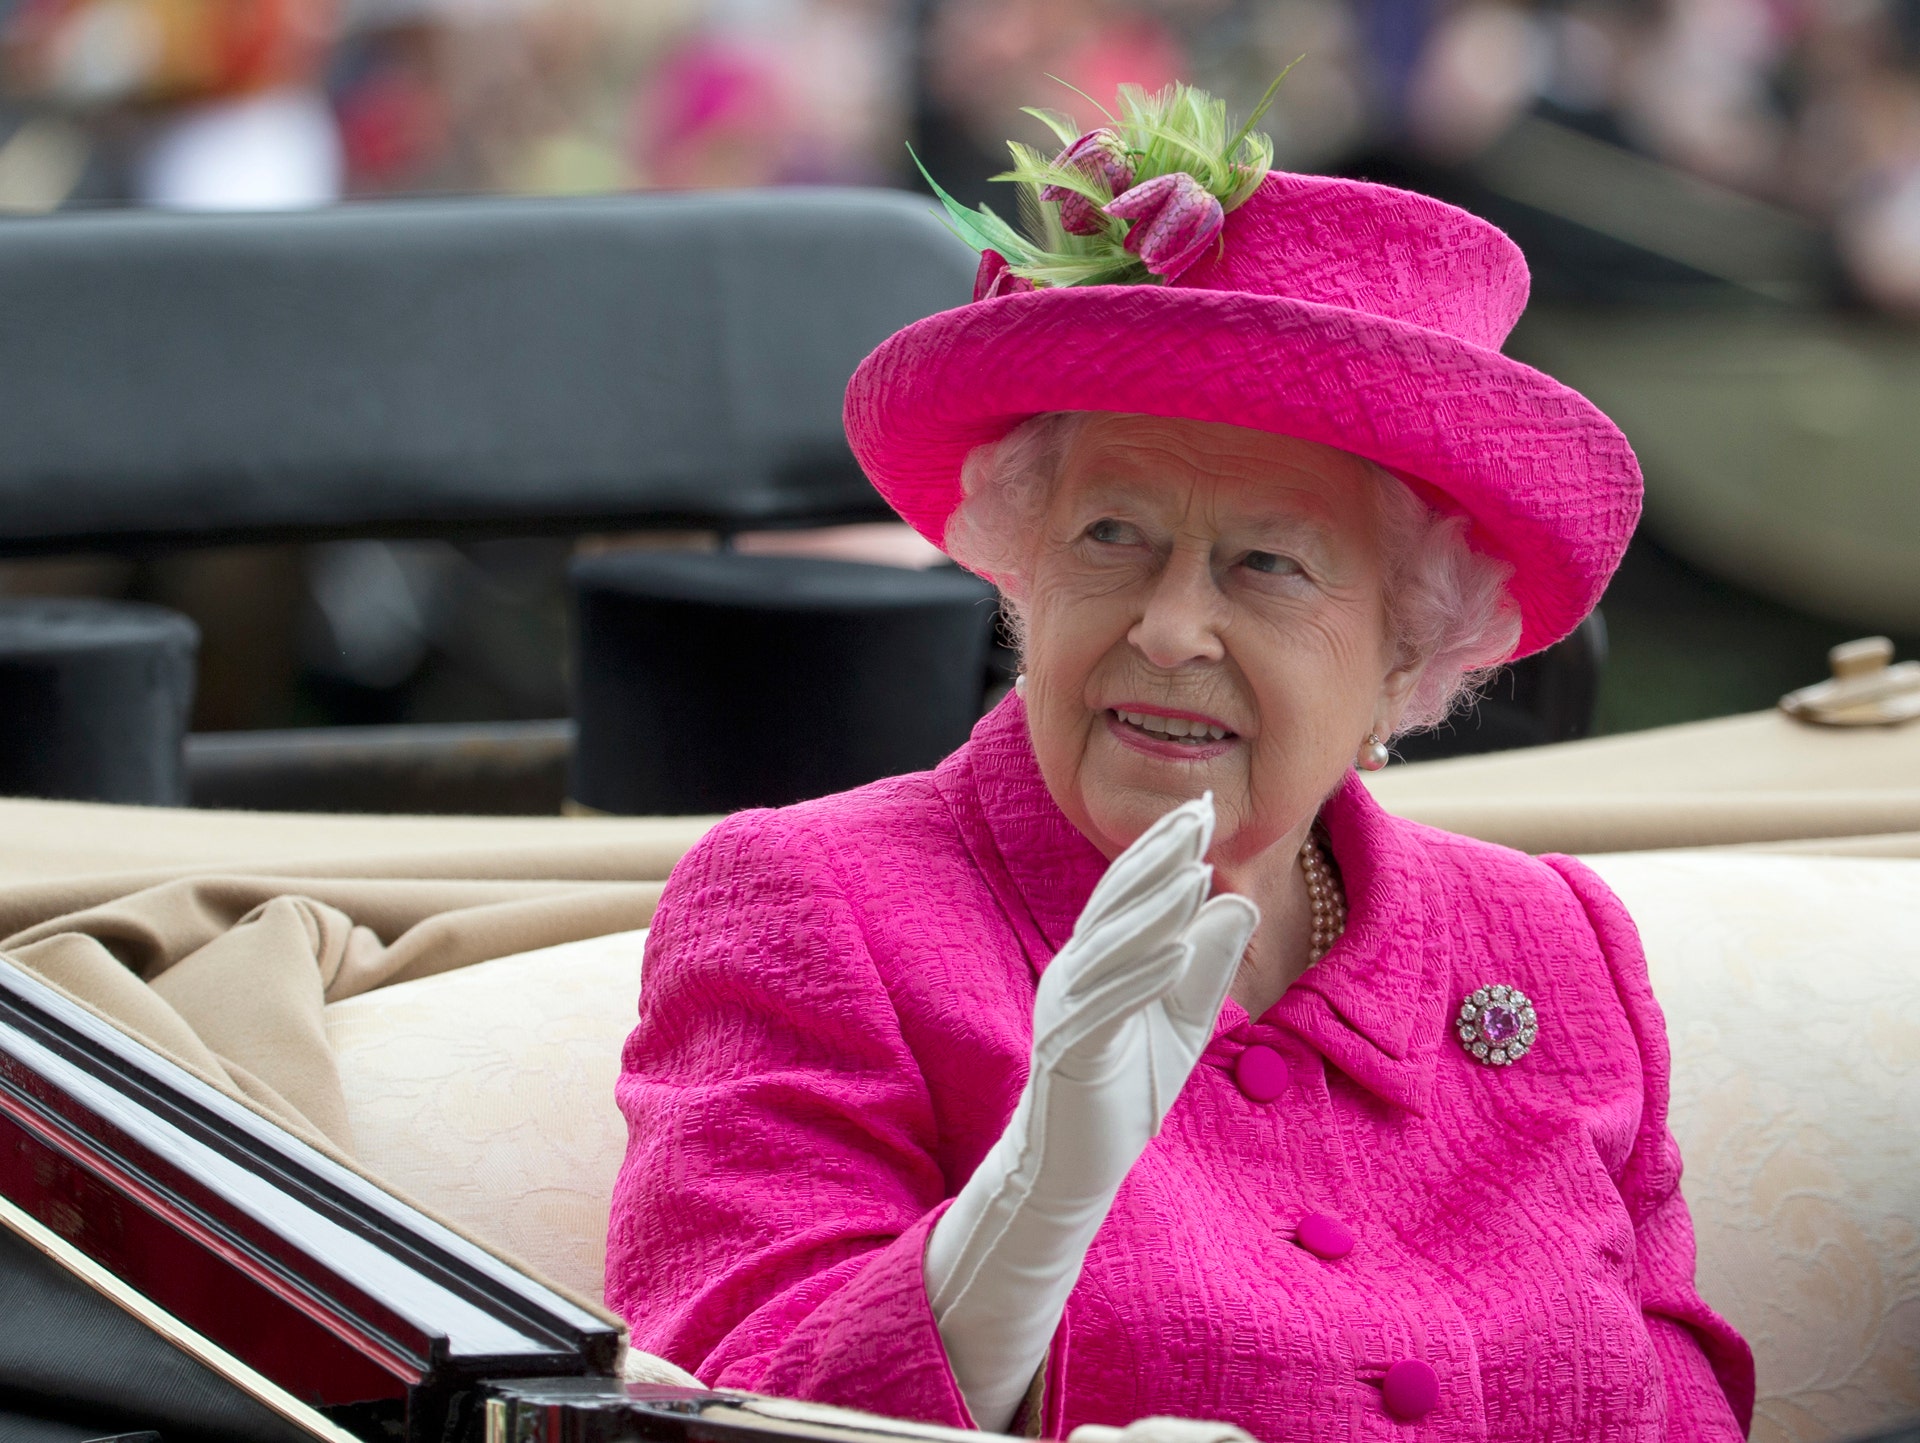 Queen Elizabeth, 95, spent night in hospital to be checked: Palace